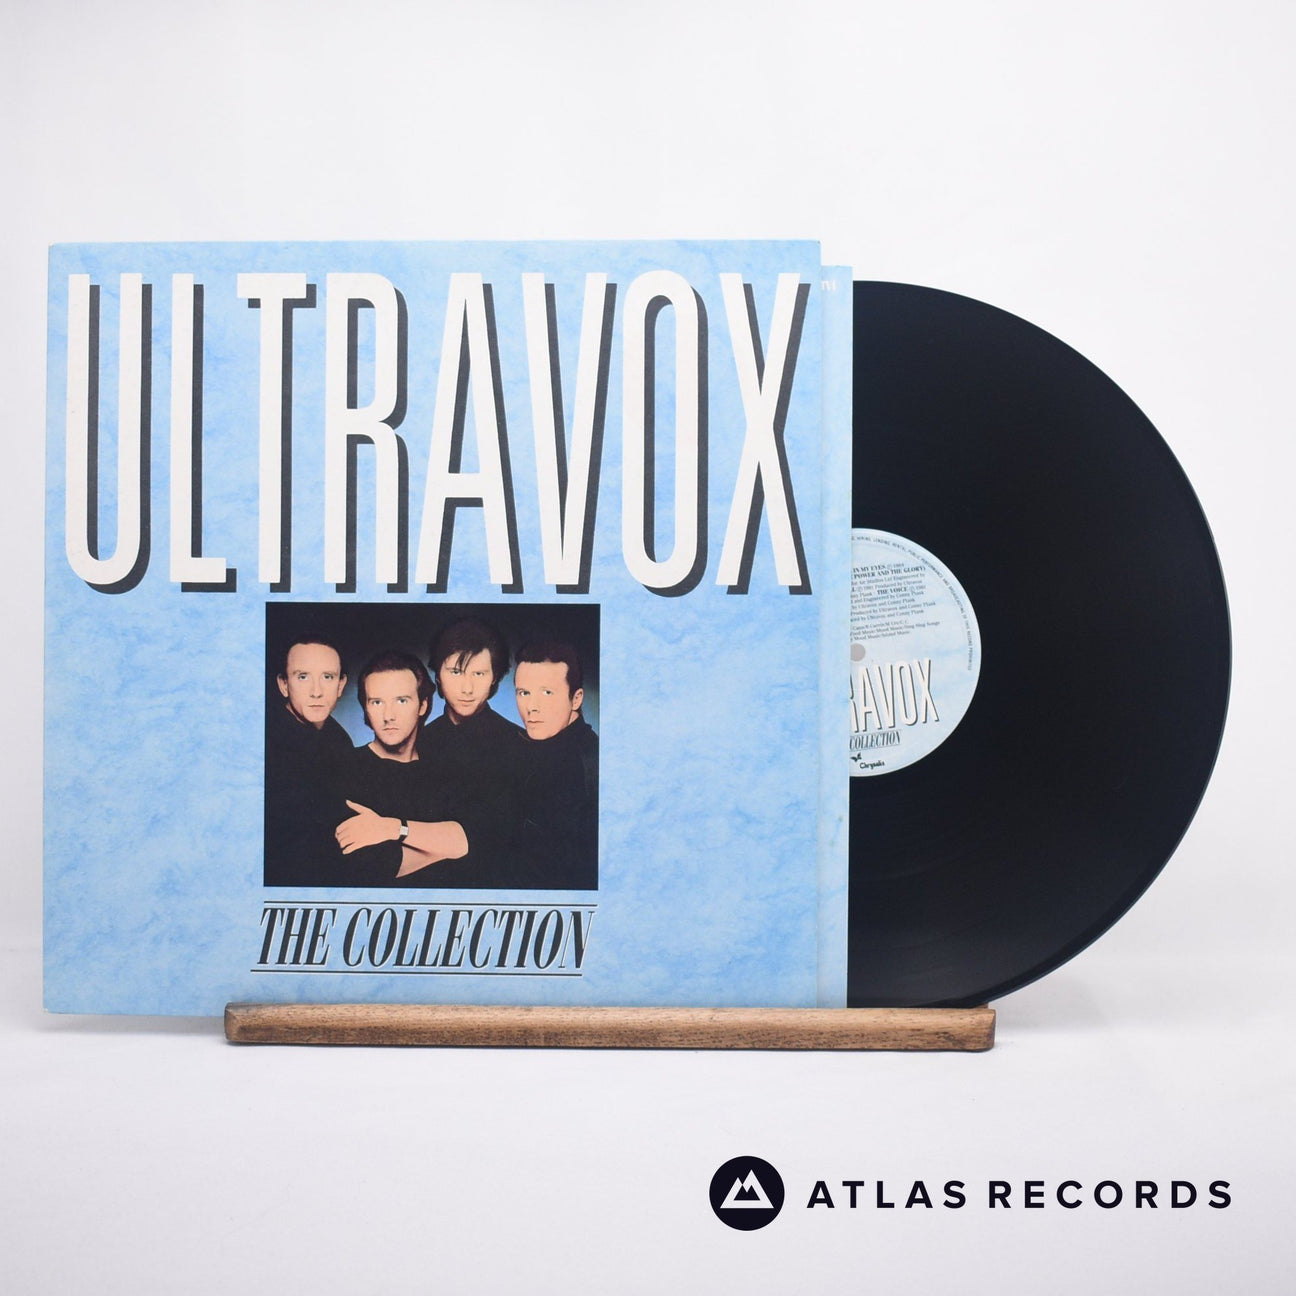 Ultravox The Collection LP Vinyl Record - Front Cover & Record